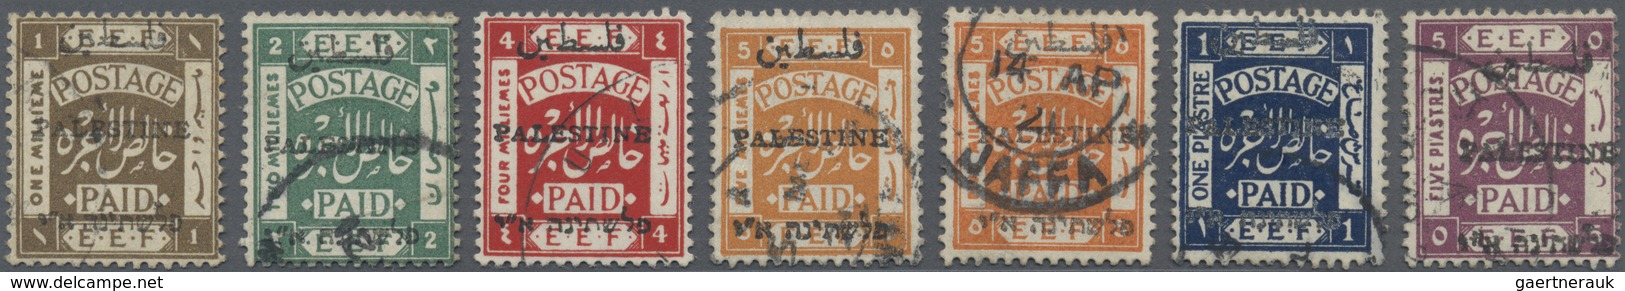 O Palästina: 1920. Definitives Complete 6 Values Perforated 14 And Color Variation 5m Additionally. Al - Palestine